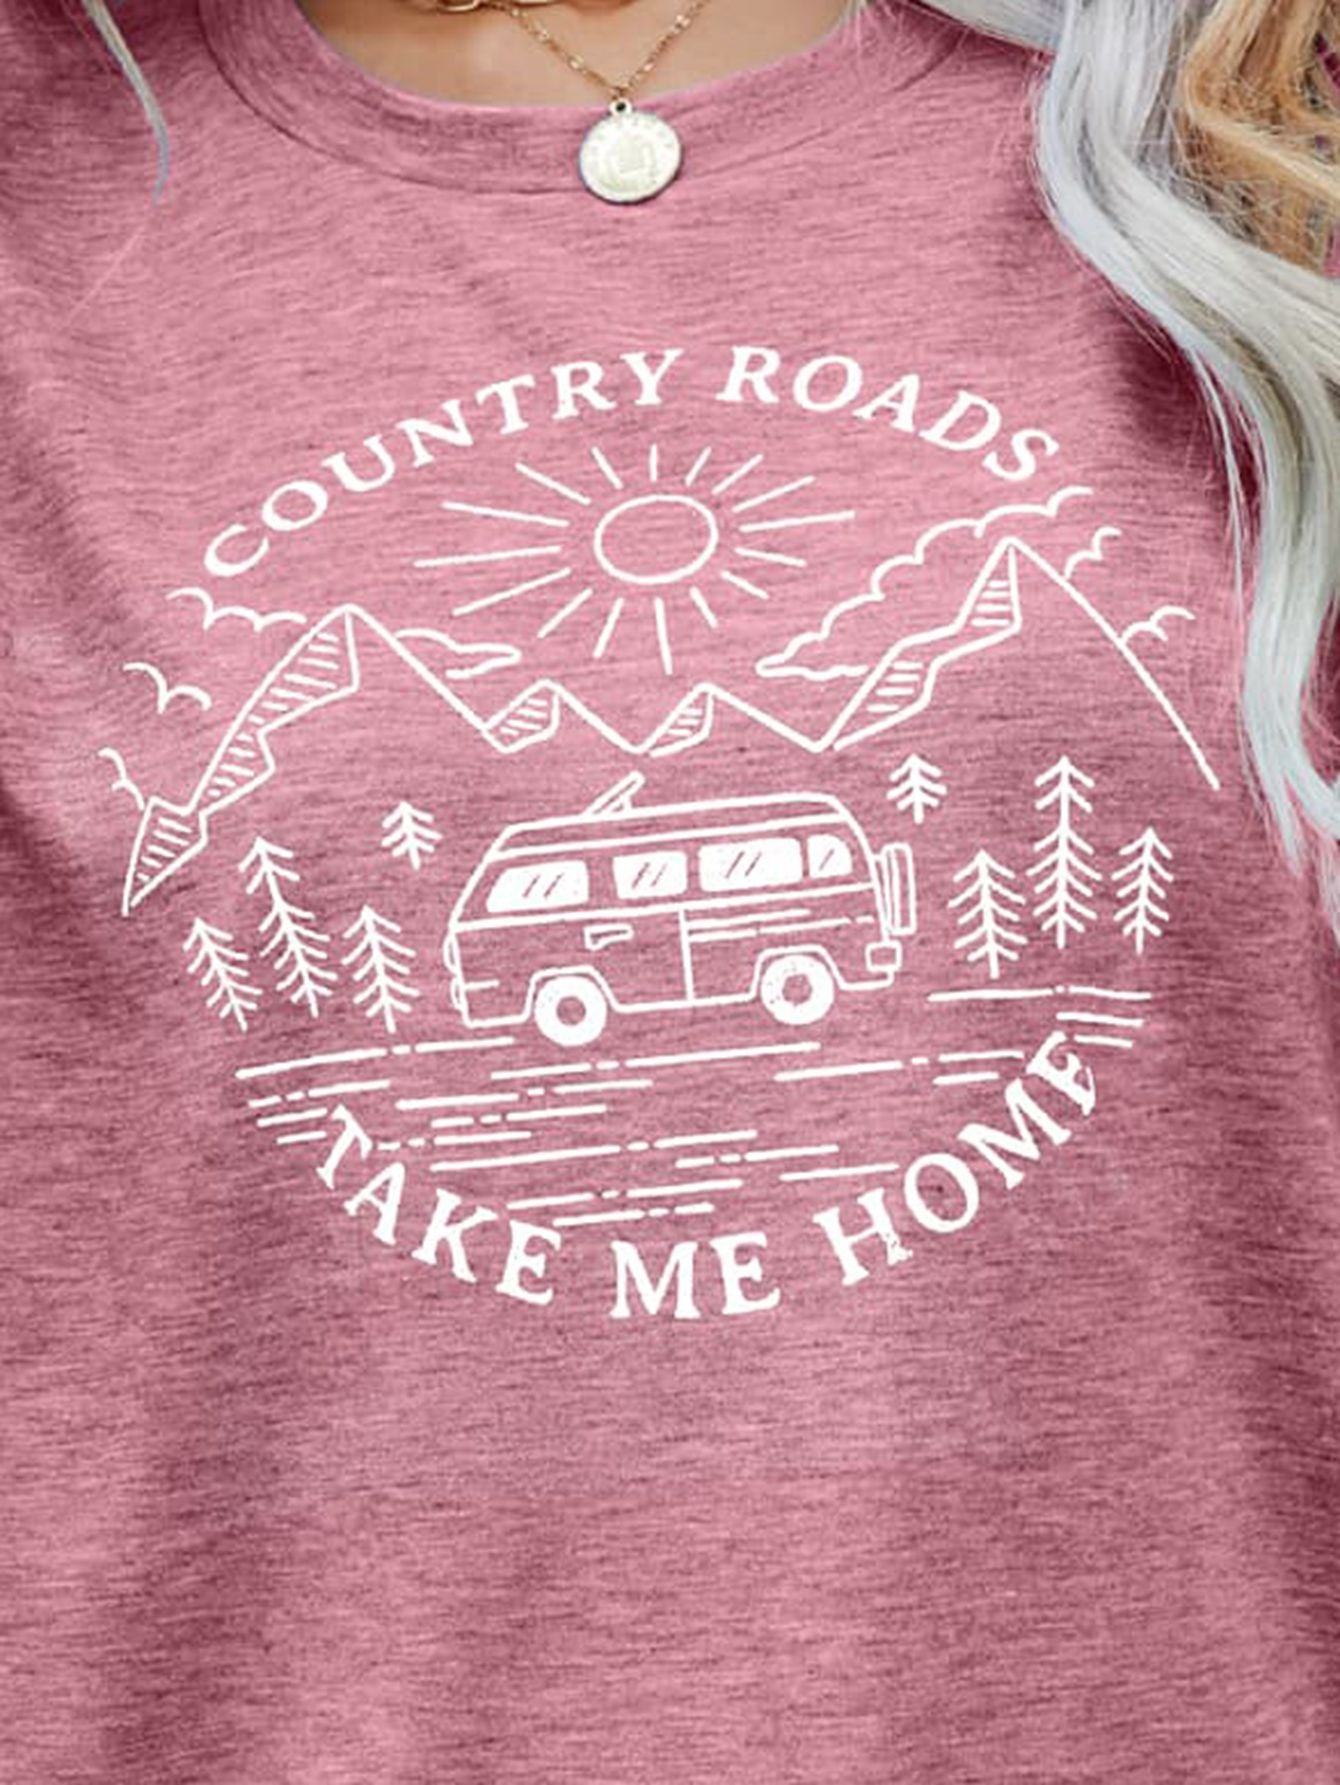 COUNTRY ROADS TAKE ME HOME Graphic Tee